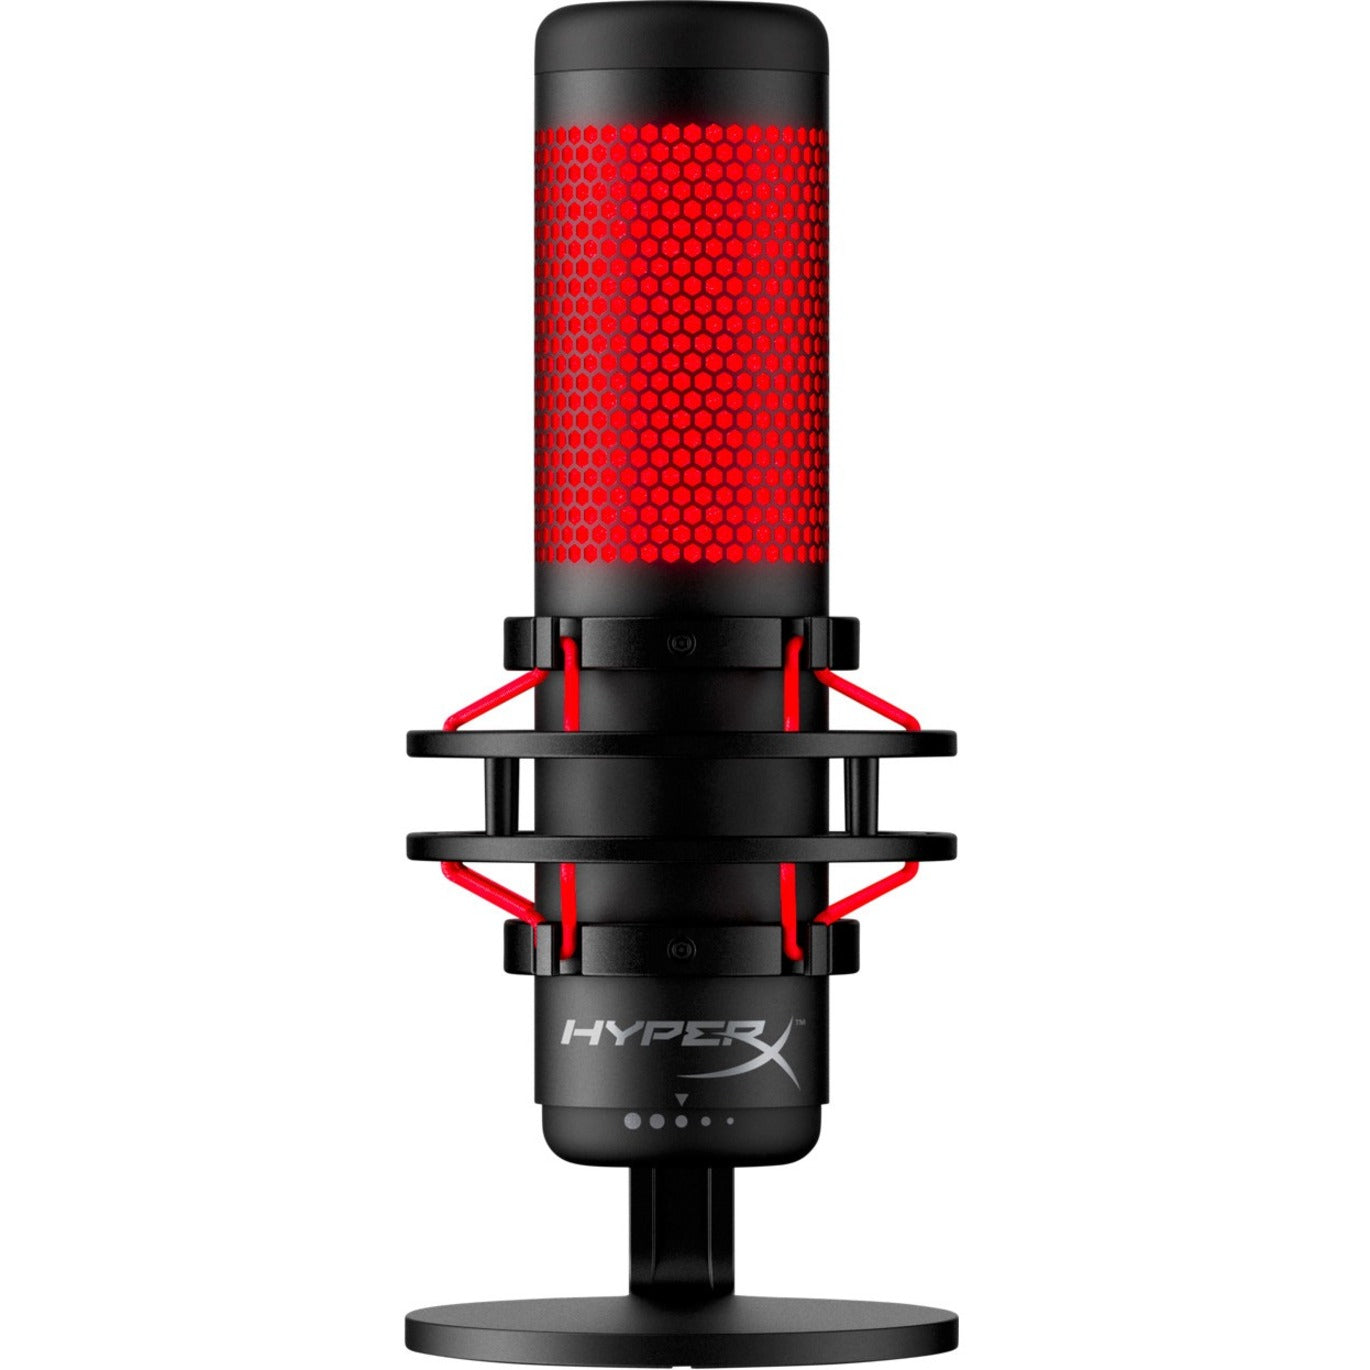 HyperX 4P5P6AA QuadCast Microphone - Black, Red, Electret Condenser, Mute and Polar Pattern Control